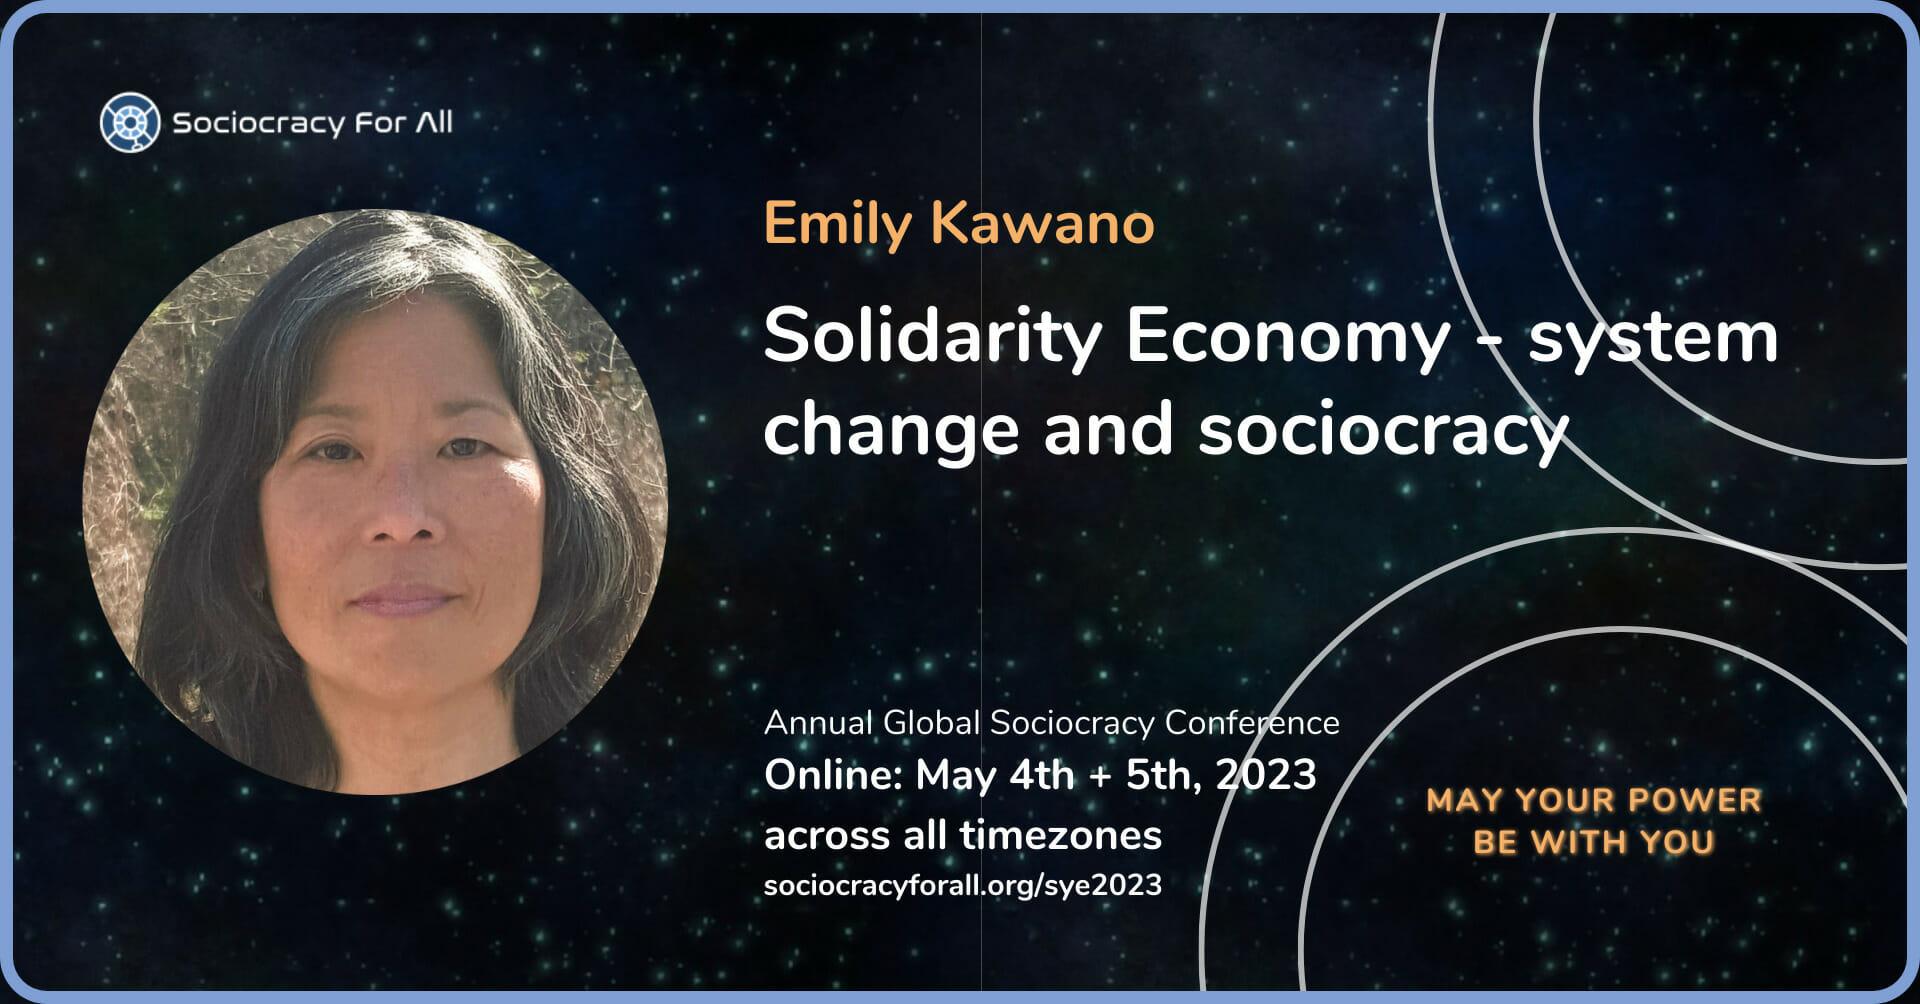 Solidarity Economy - system change and sociocracy